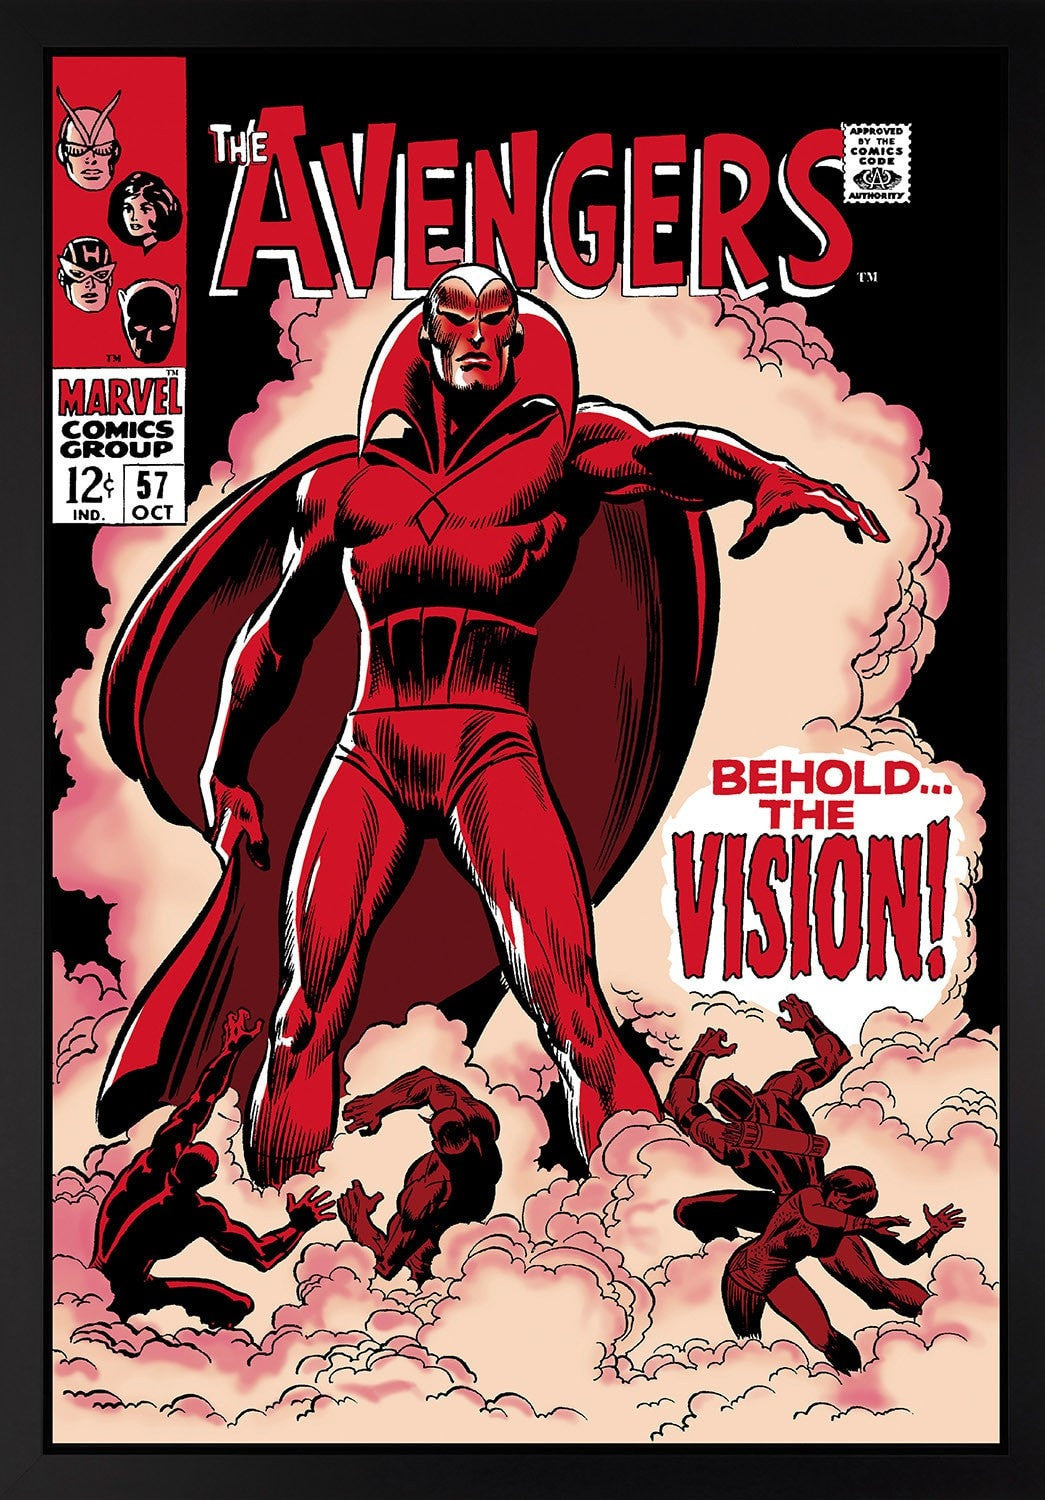 The Avengers #57 - Behold The Vision! Stan Lee